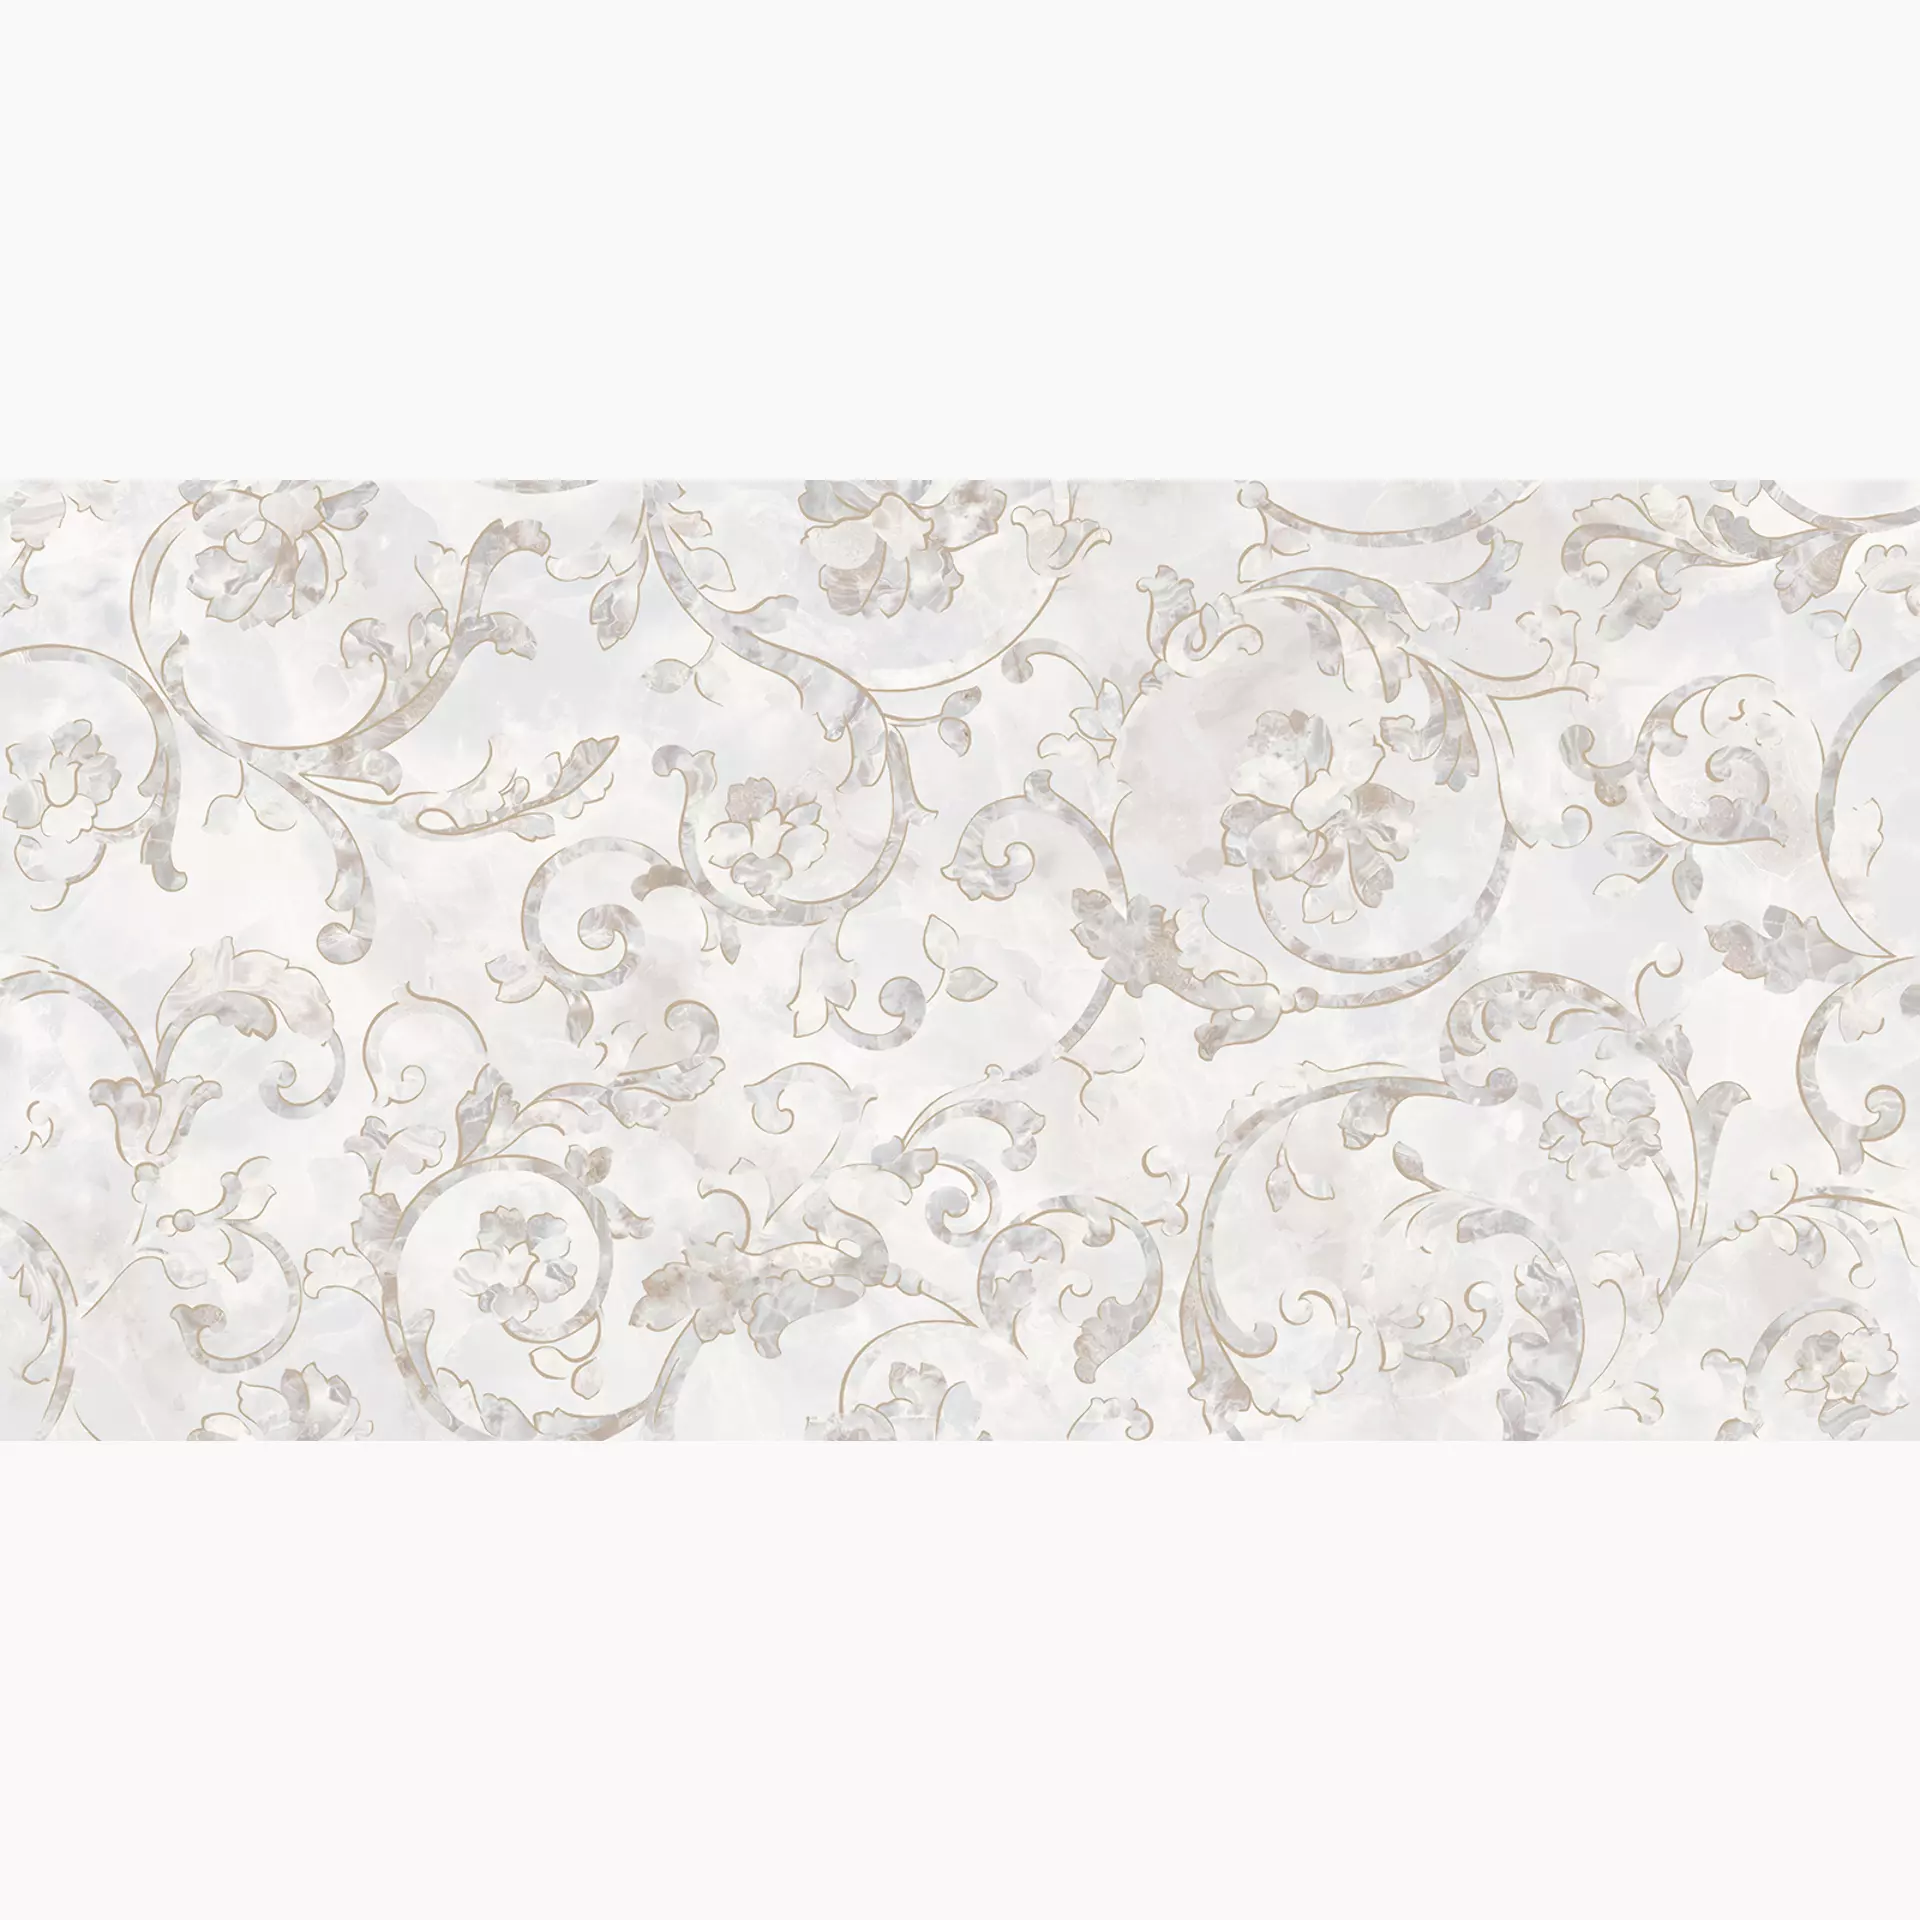 Versace Emote Onice Bianco Lux Floreale G0262550 39x78cm rectified 9,5mm